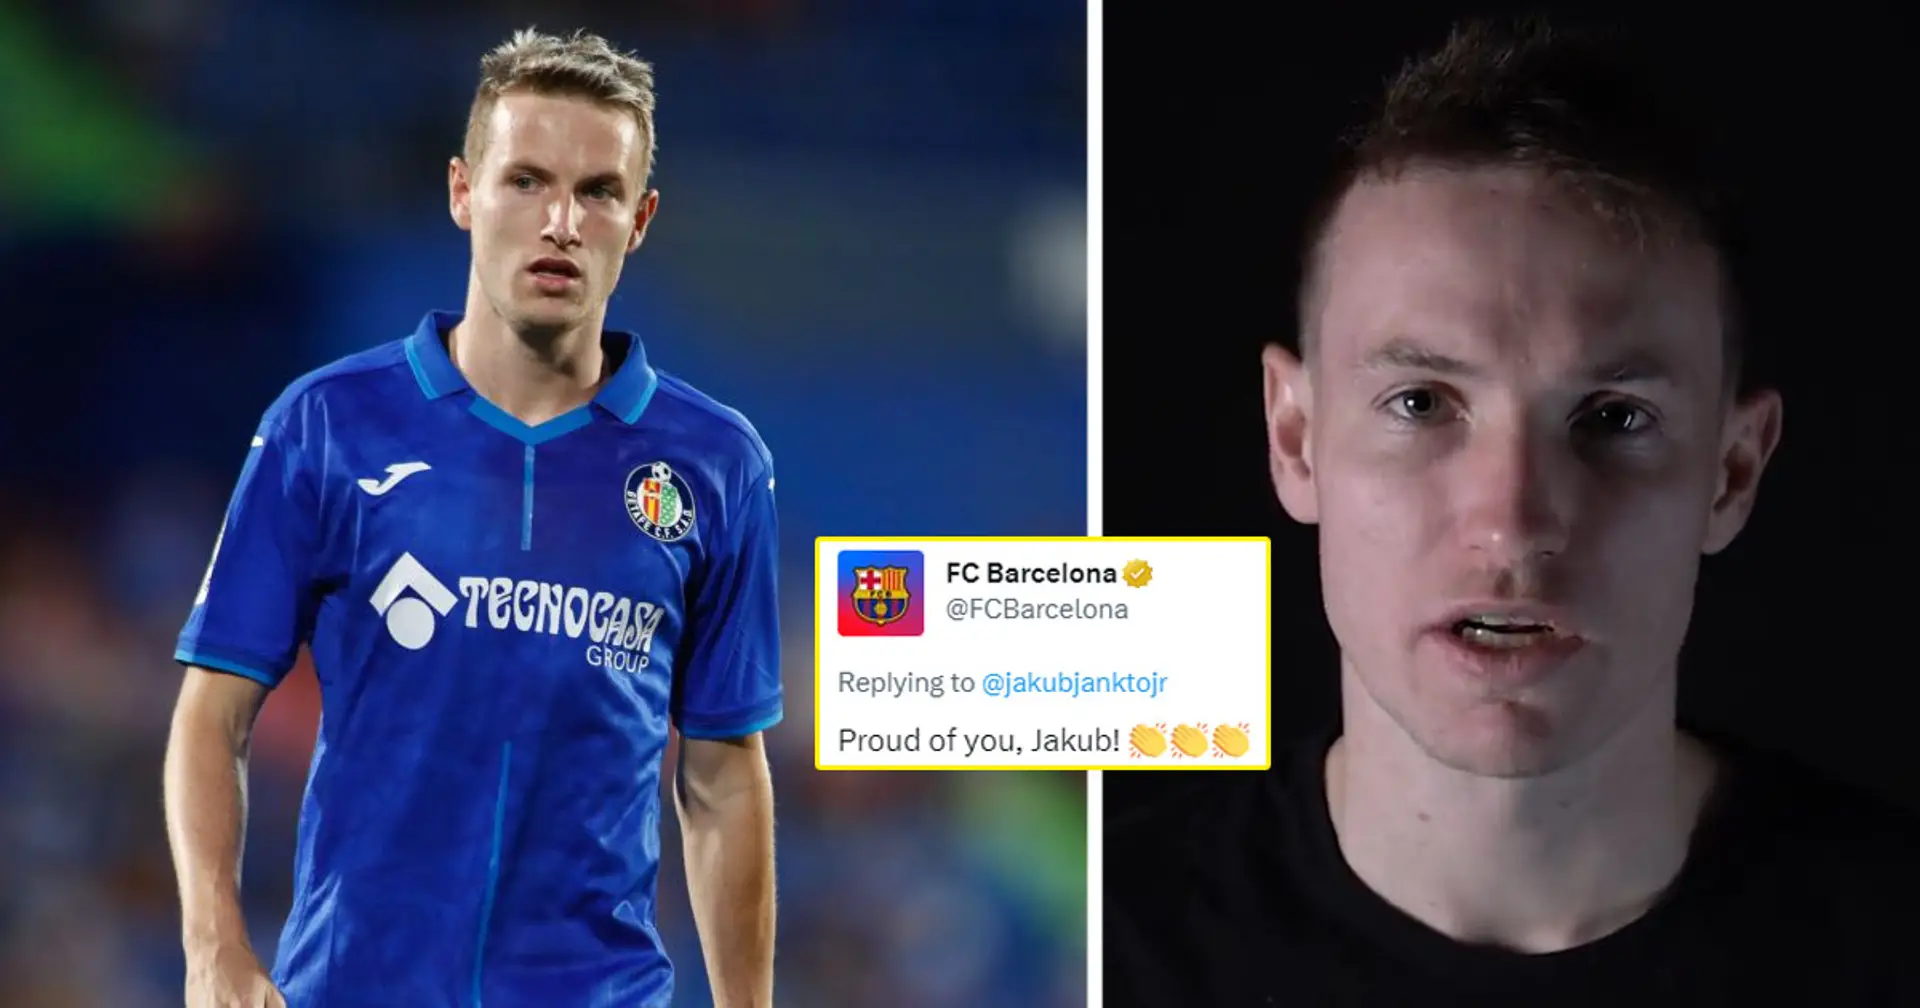 La Liga footballer comes out as gay for the first time ever